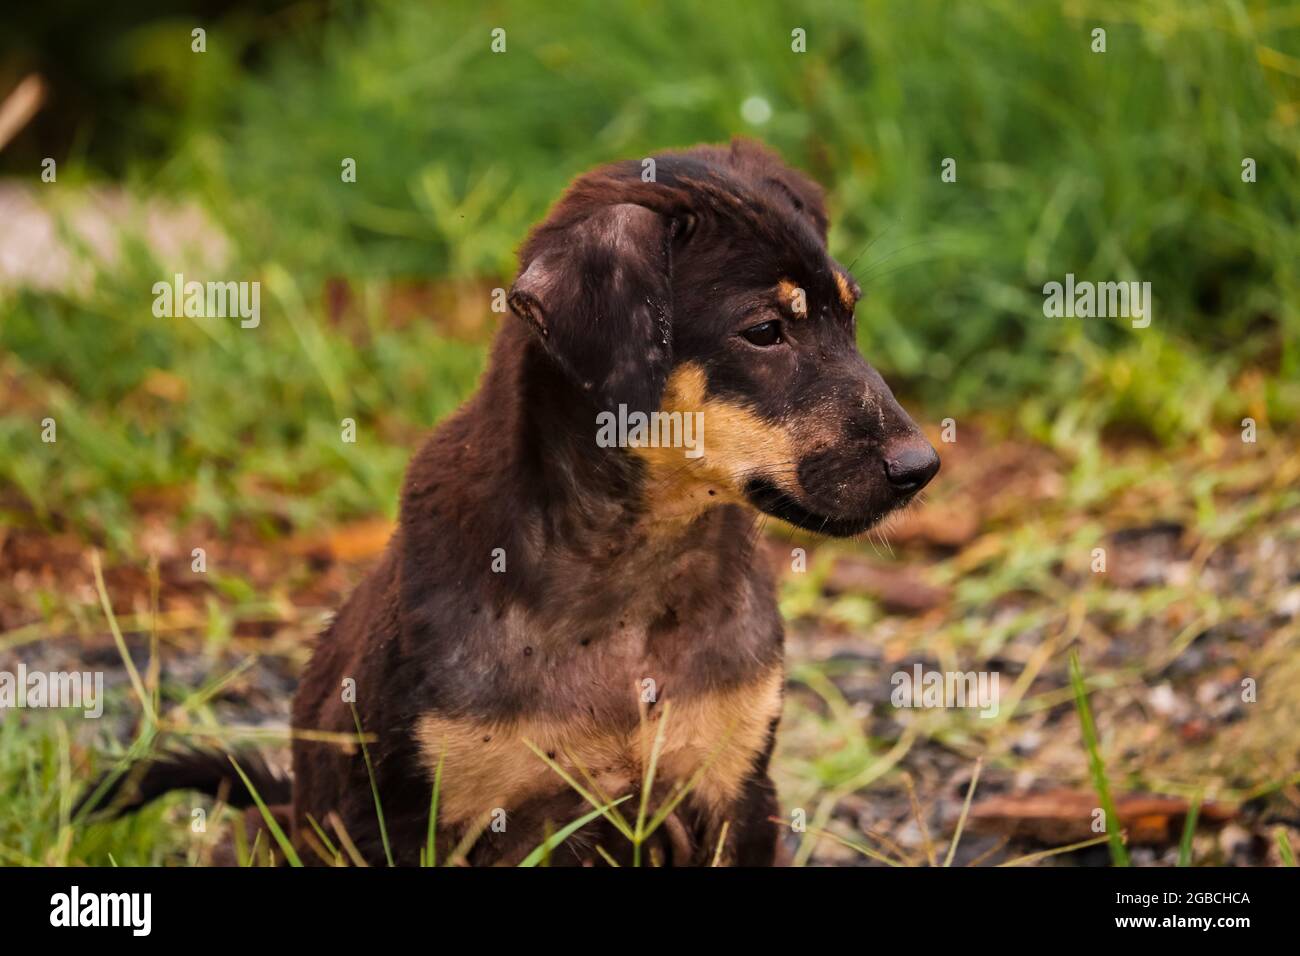 Dog sitting on the ground in grass Stock Photo